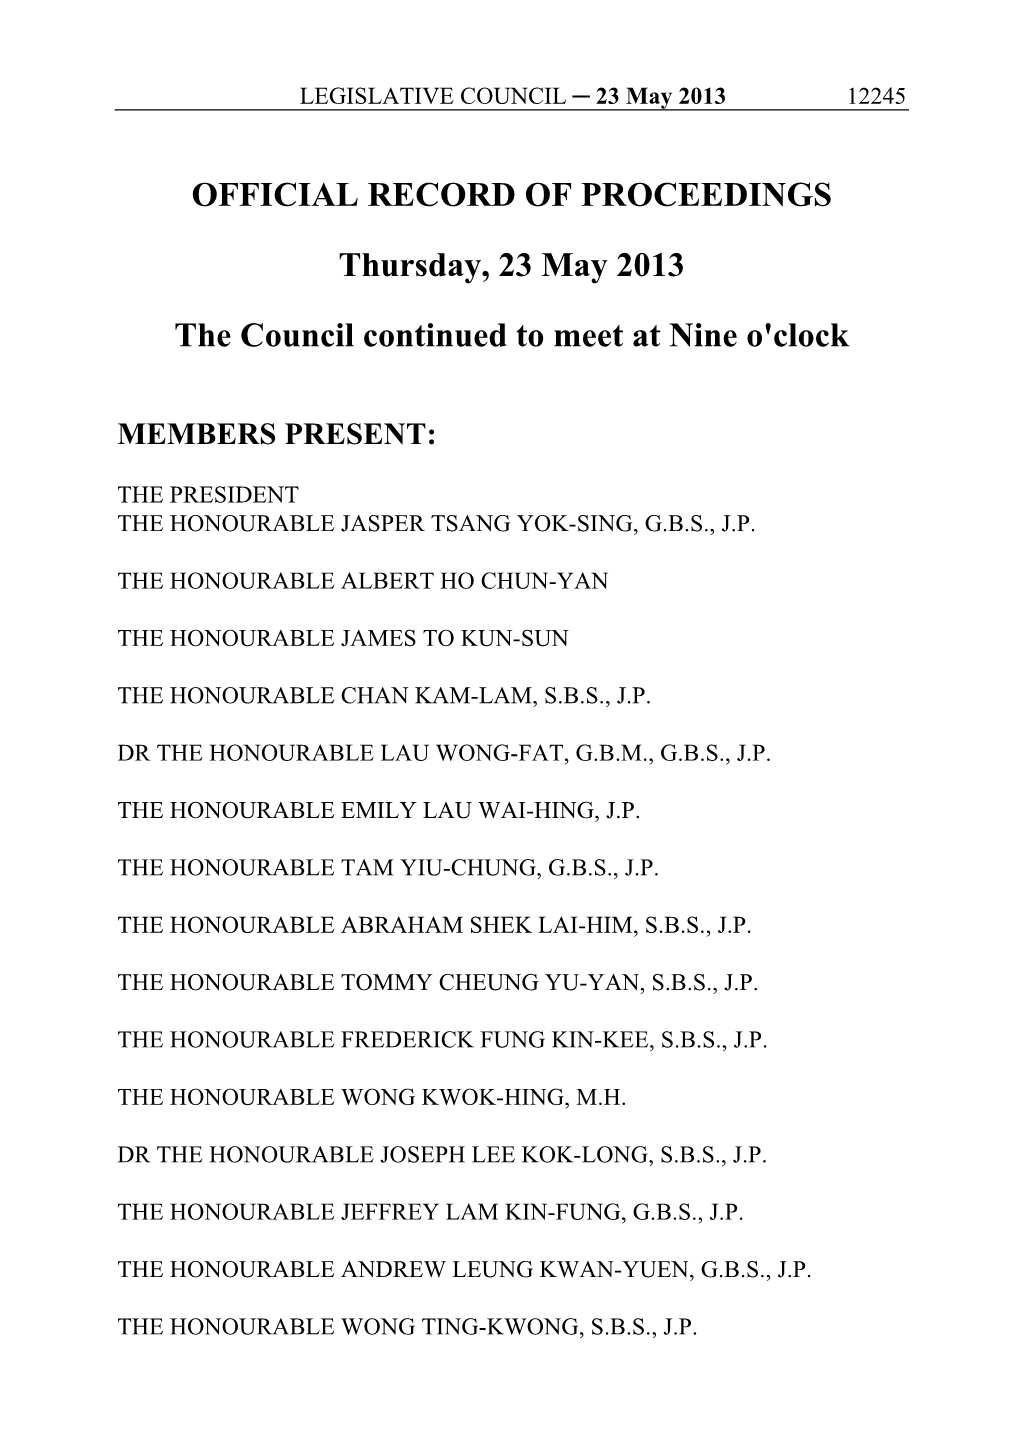 OFFICIAL RECORD of PROCEEDINGS Thursday, 23 May